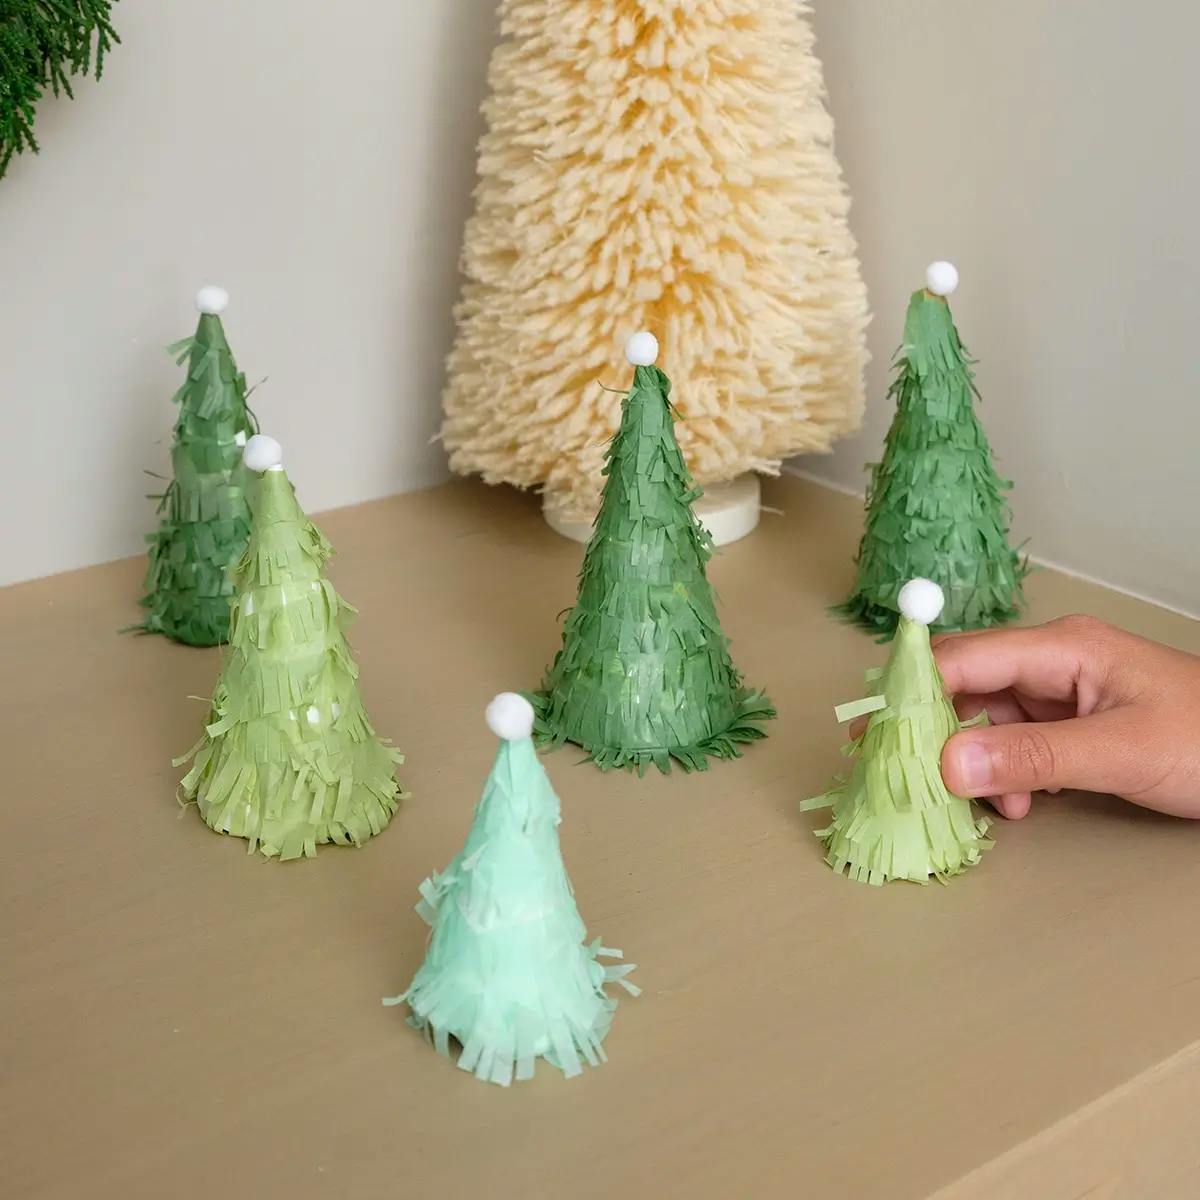 A Christmas paper craft tutorial showing how to make a paper Christmas tree.